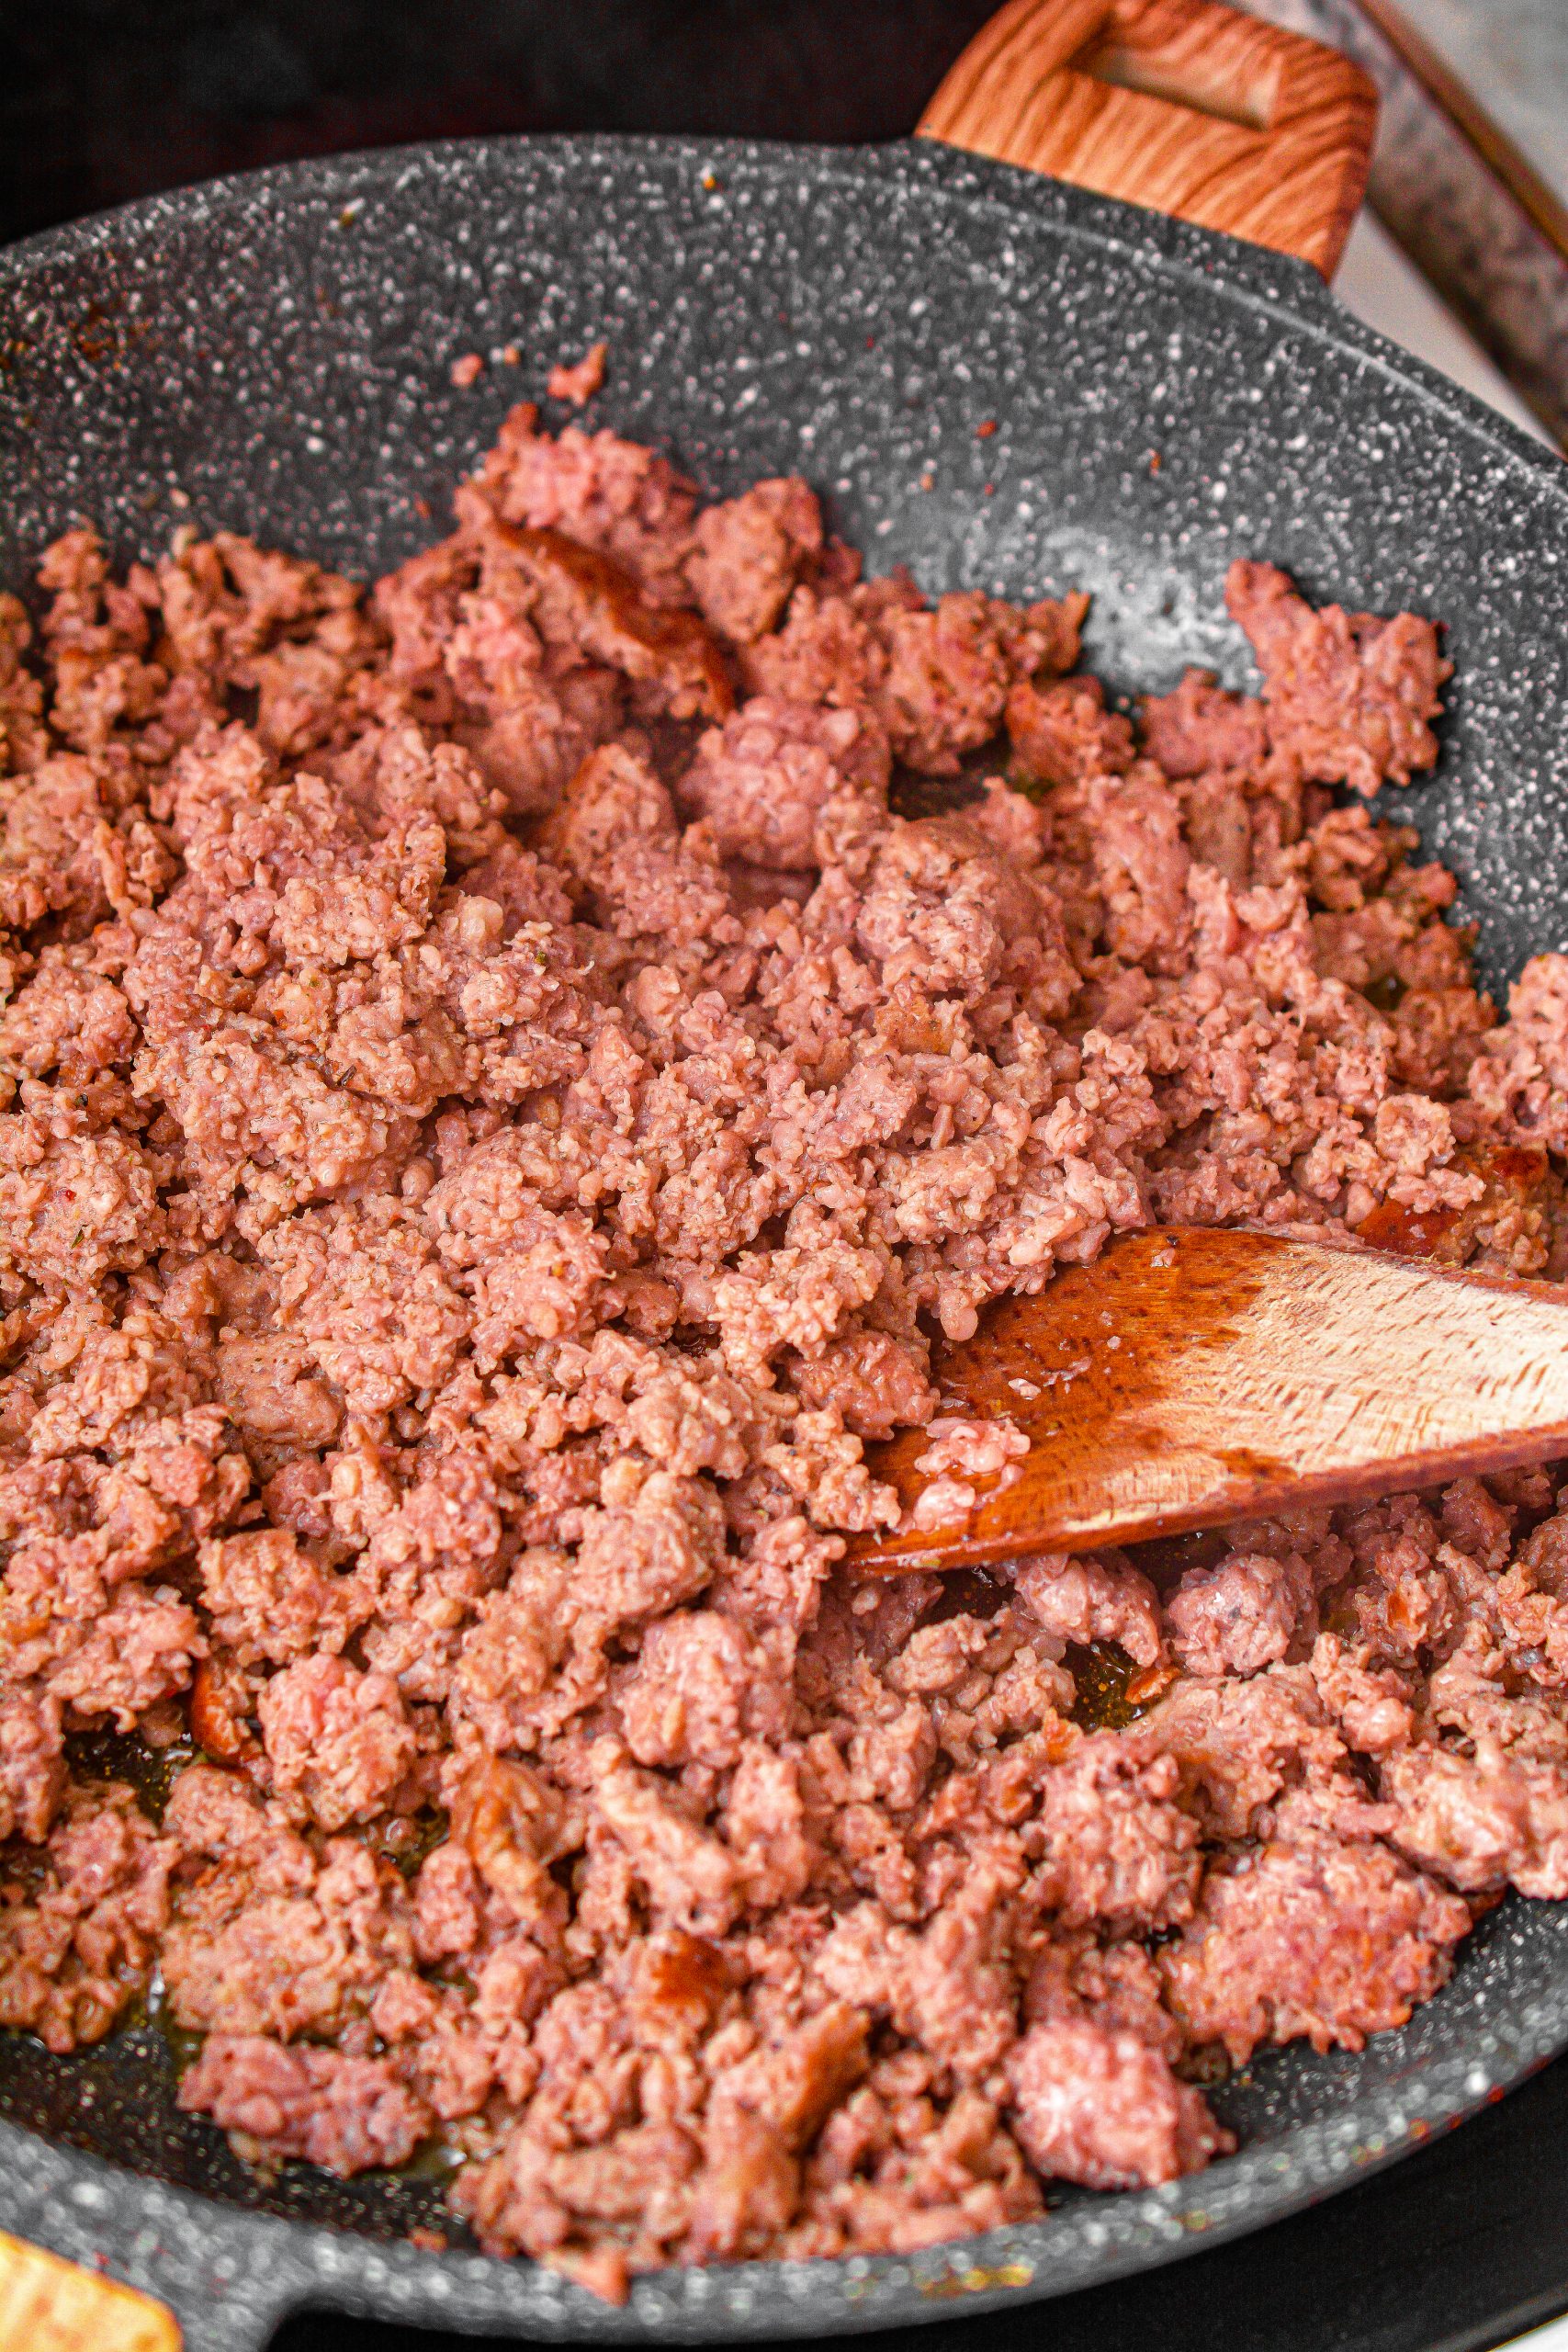 Saute the sausage over medium-high heat until completely browned. Drain any excess grease.